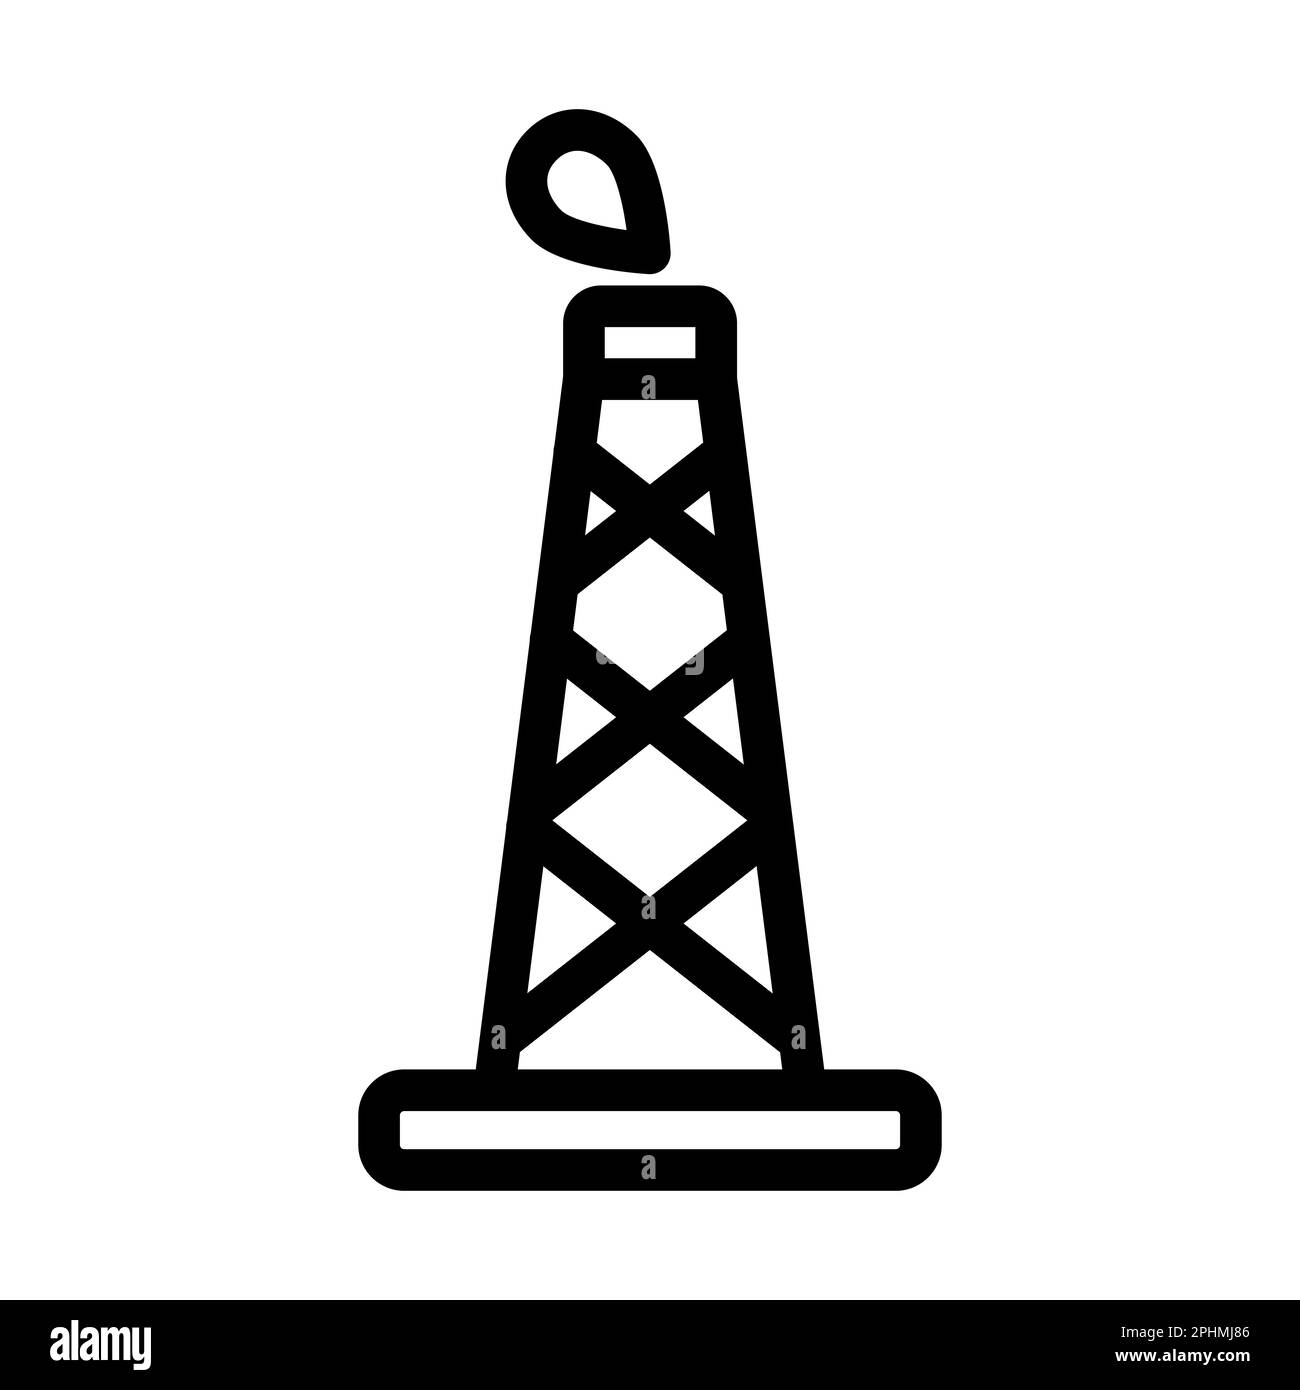 Oil Tower Vector Thick Line Icon For Personal And Commercial Use. Stock Photo